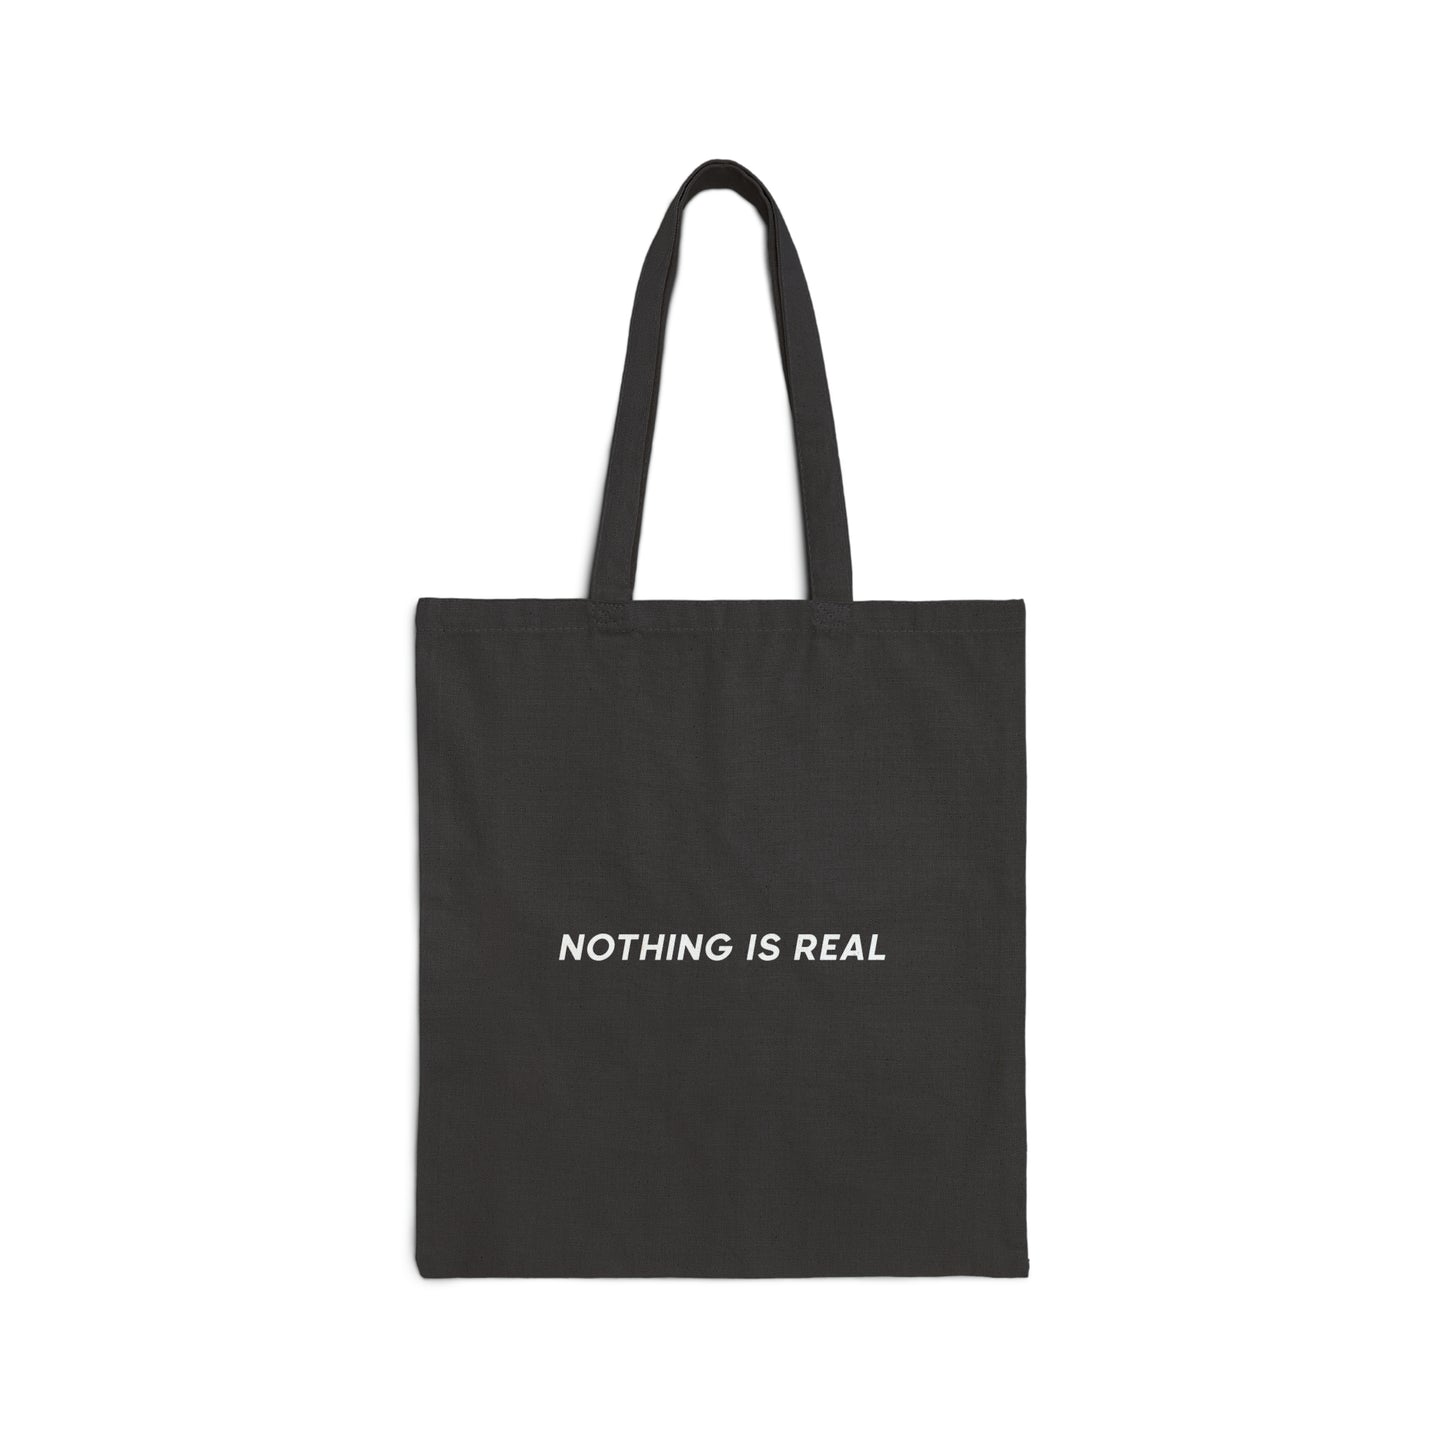 NOTHING IS REAL | Cotton Tote Bag